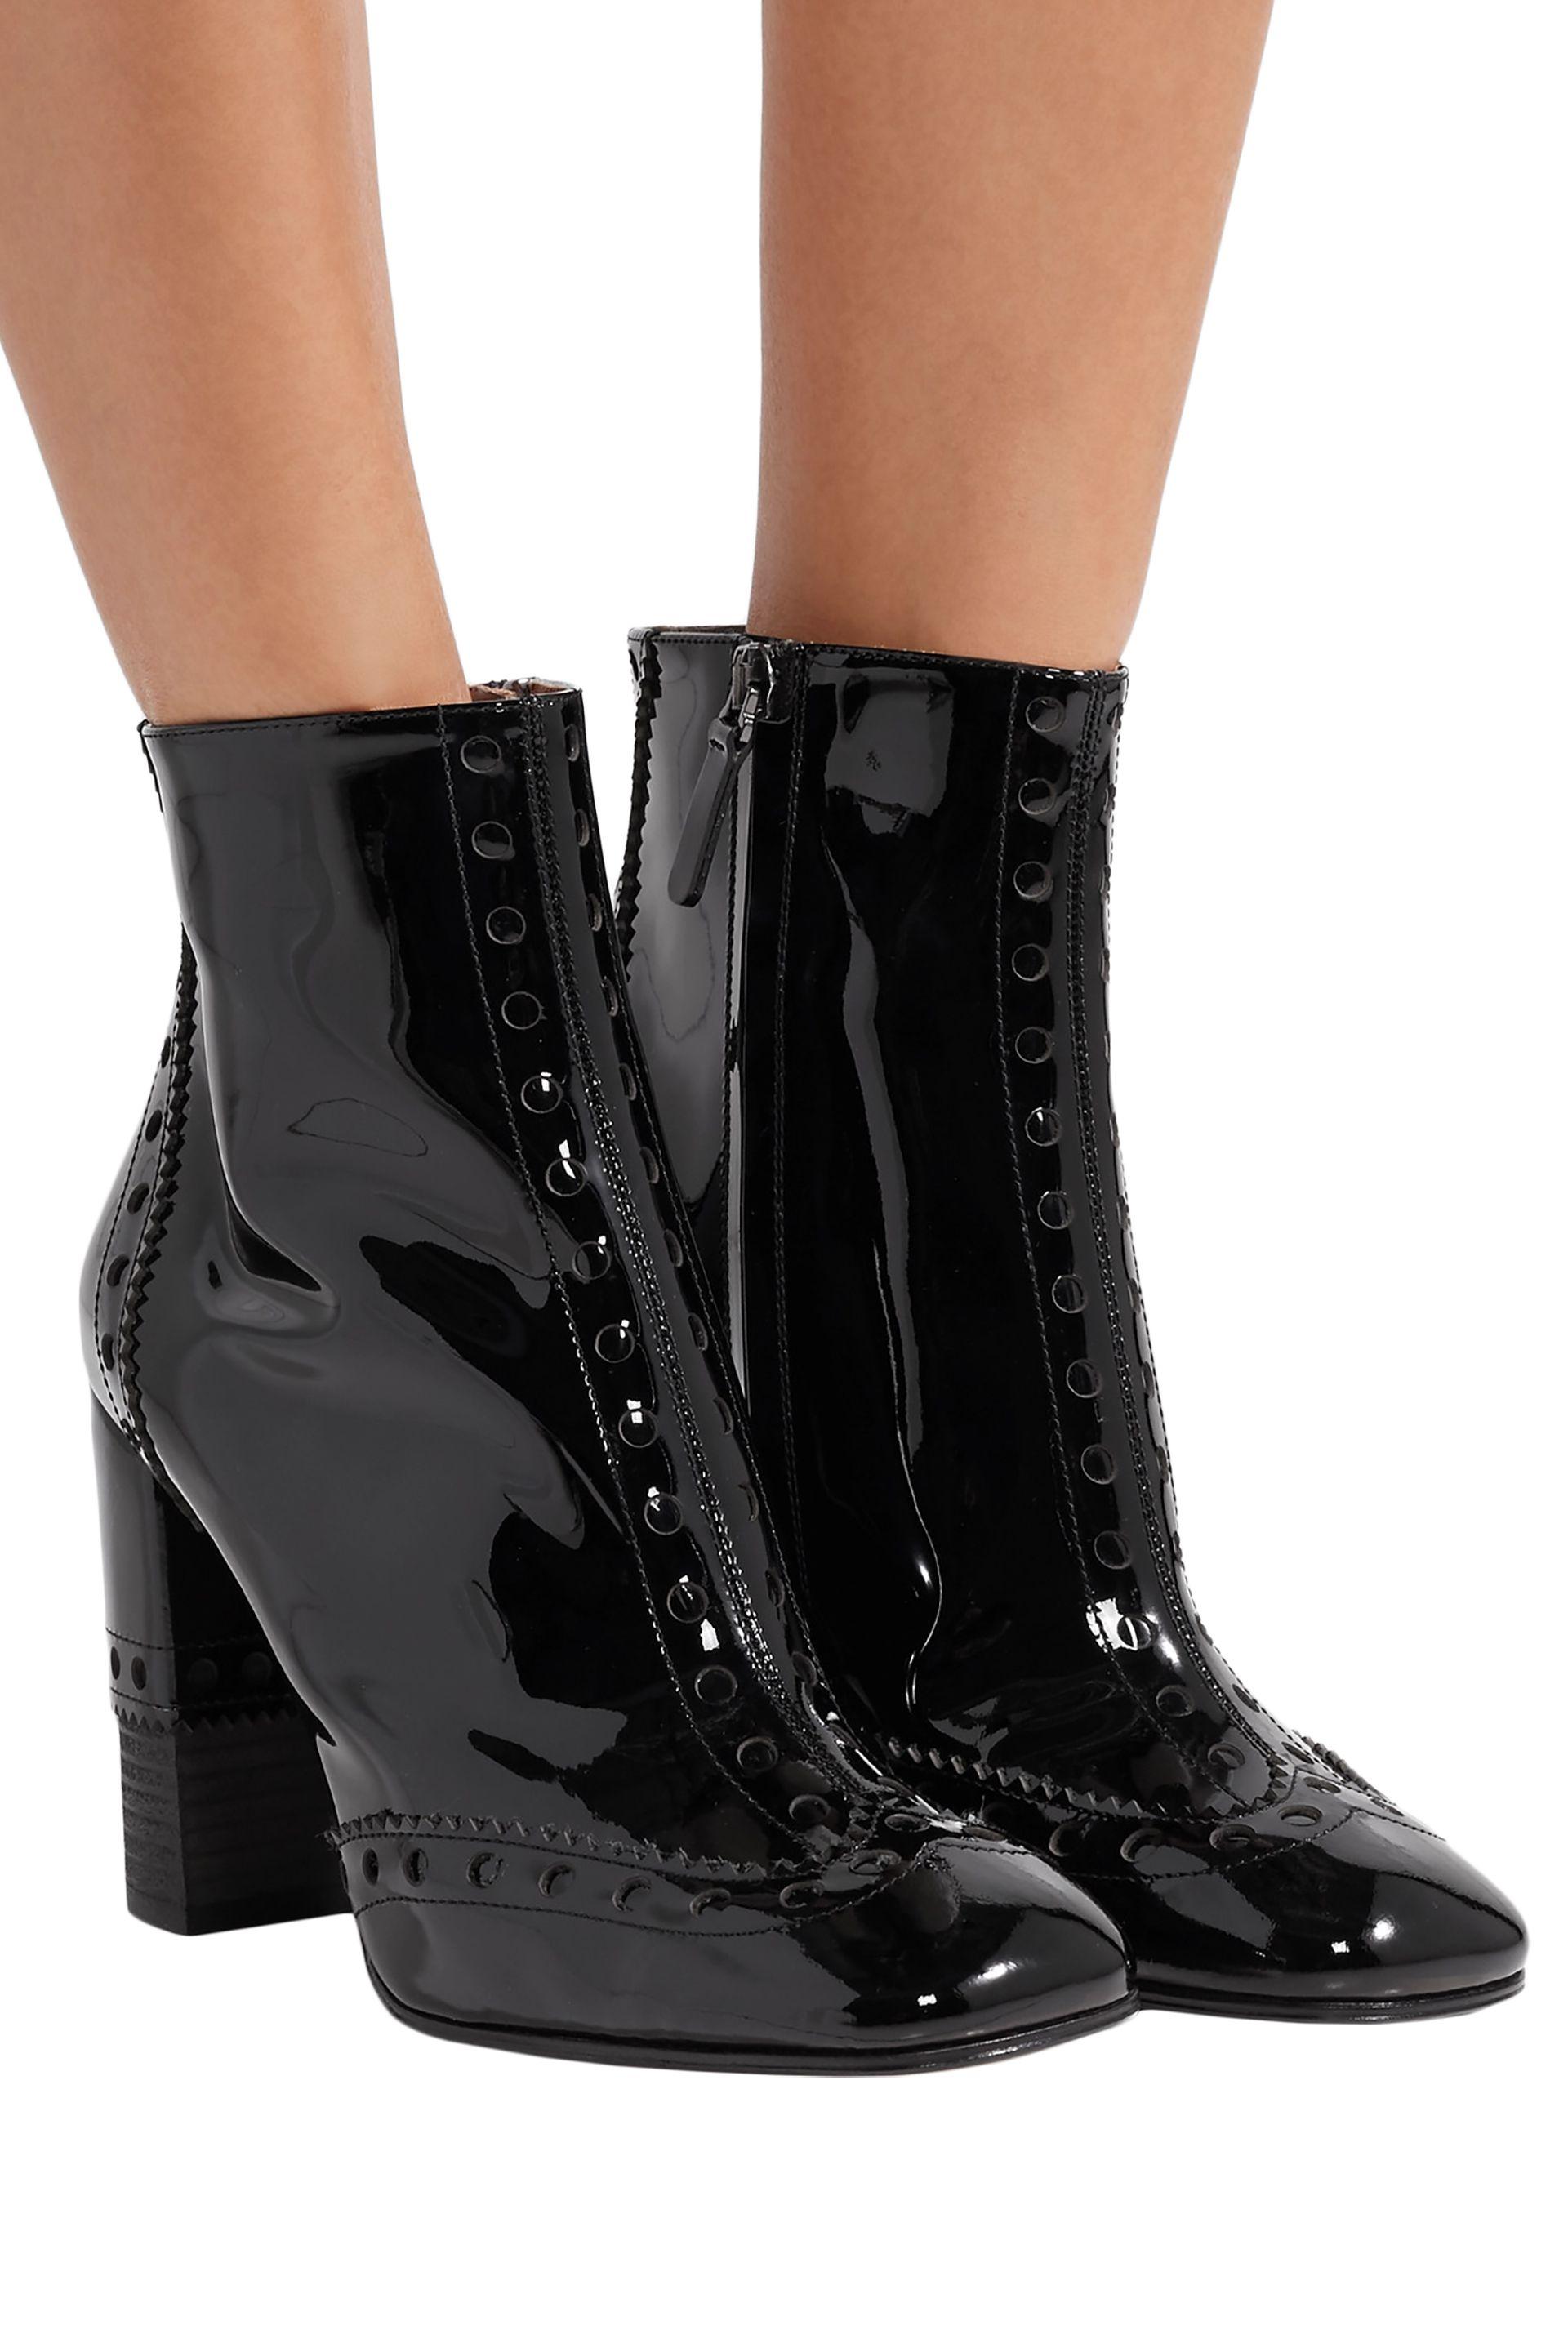 Chloé Chloé Perry Patent-leather Ankle Boots Black - Lyst